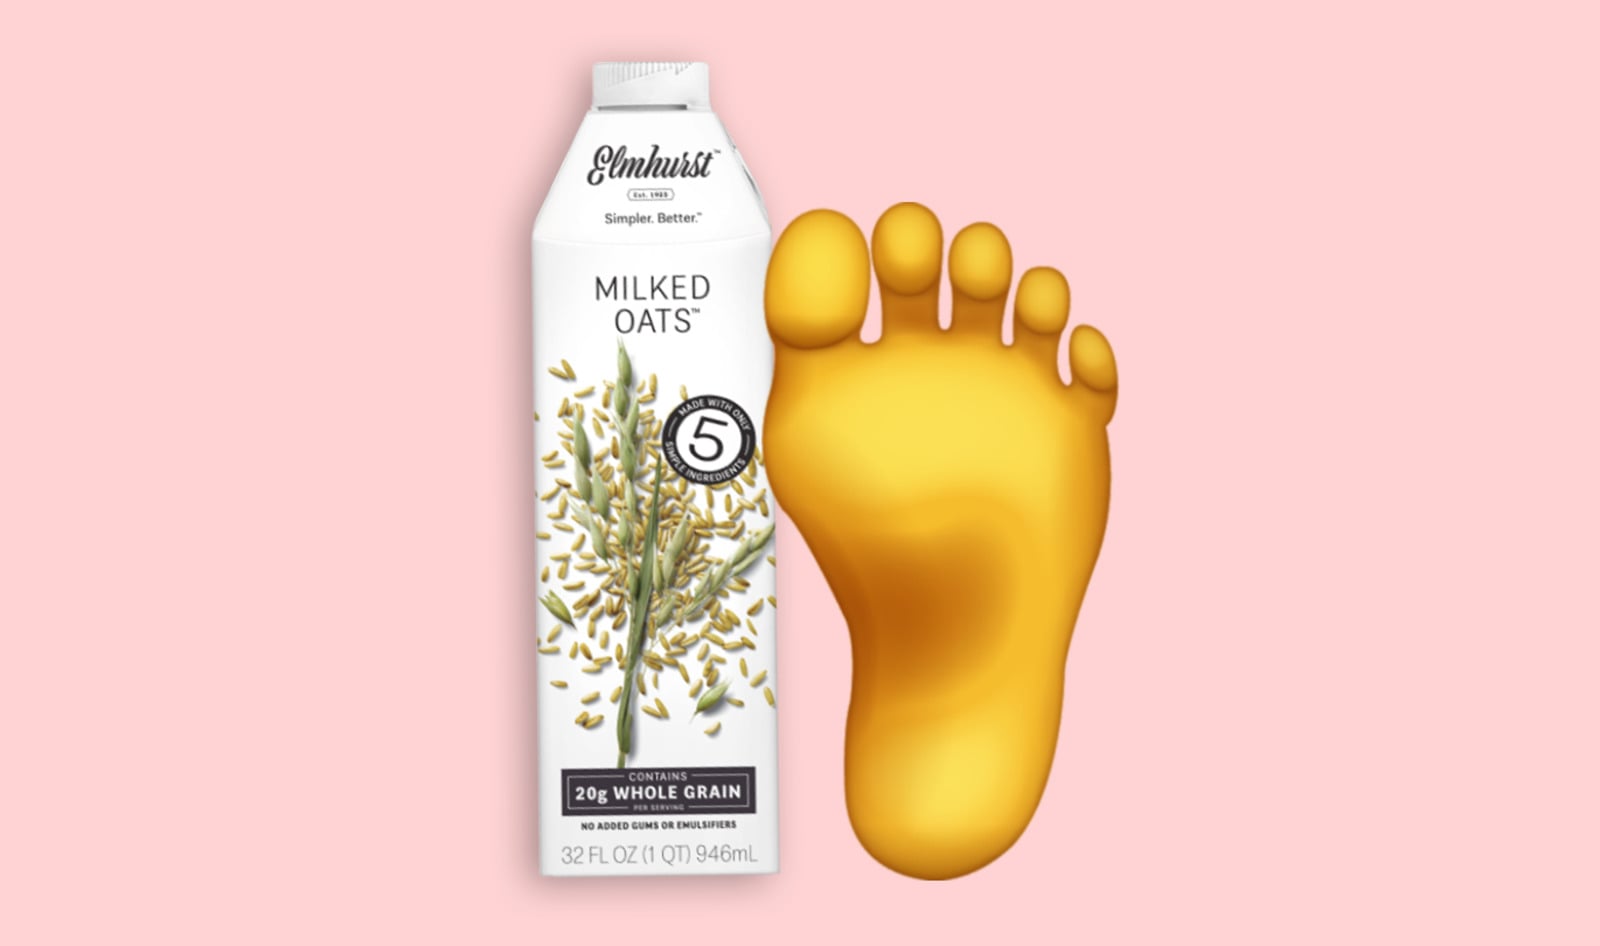 New York Spa Launches “Plant-Based and Chill” Vegan Milk Pedicures